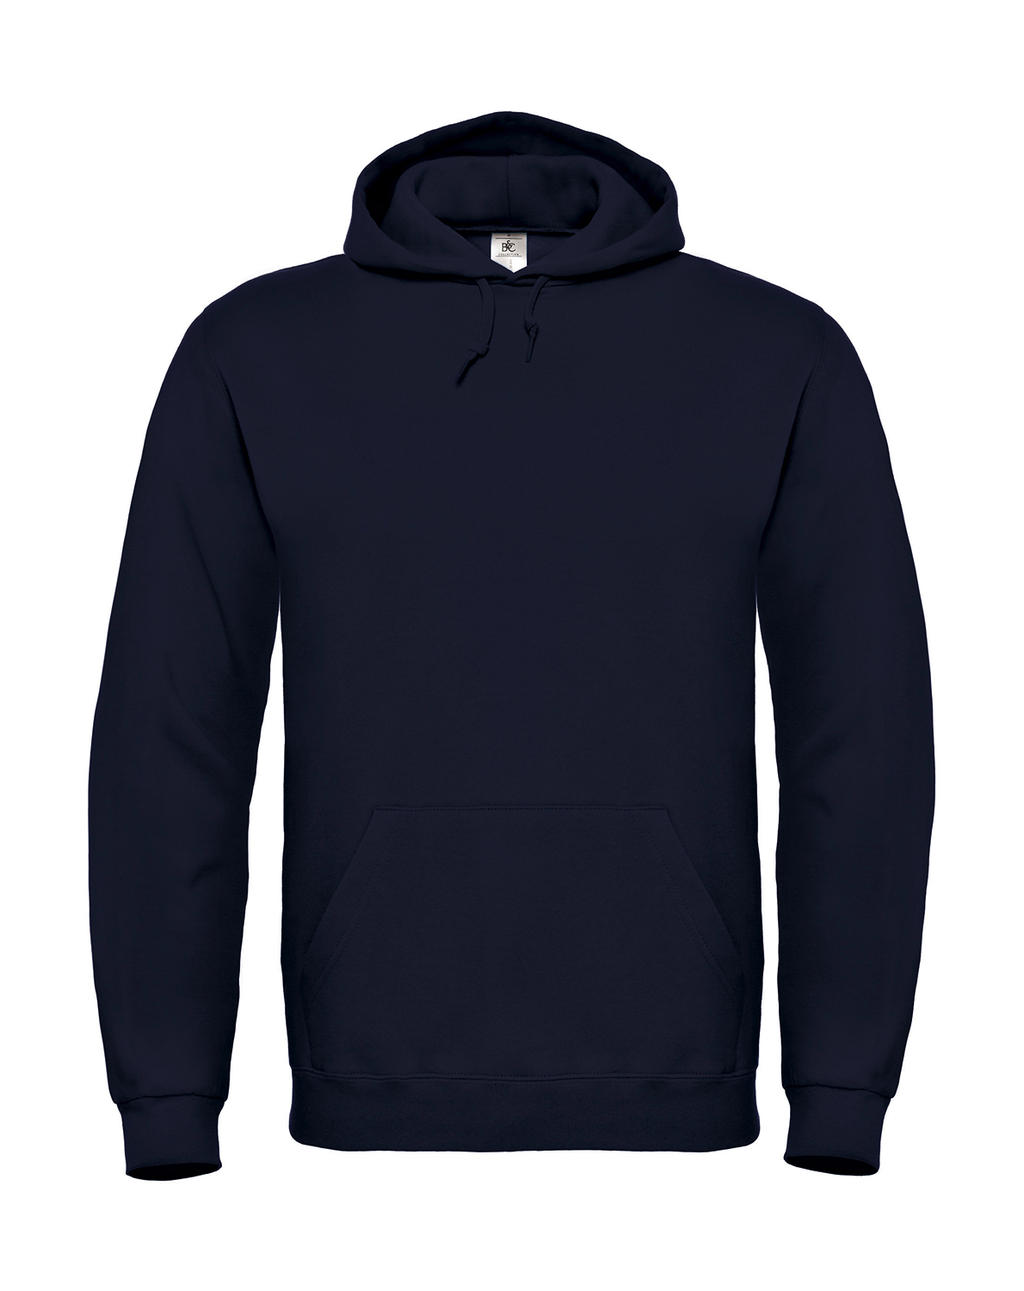  ID.003 Cotton Rich Hooded Sweatshirt in Farbe Navy